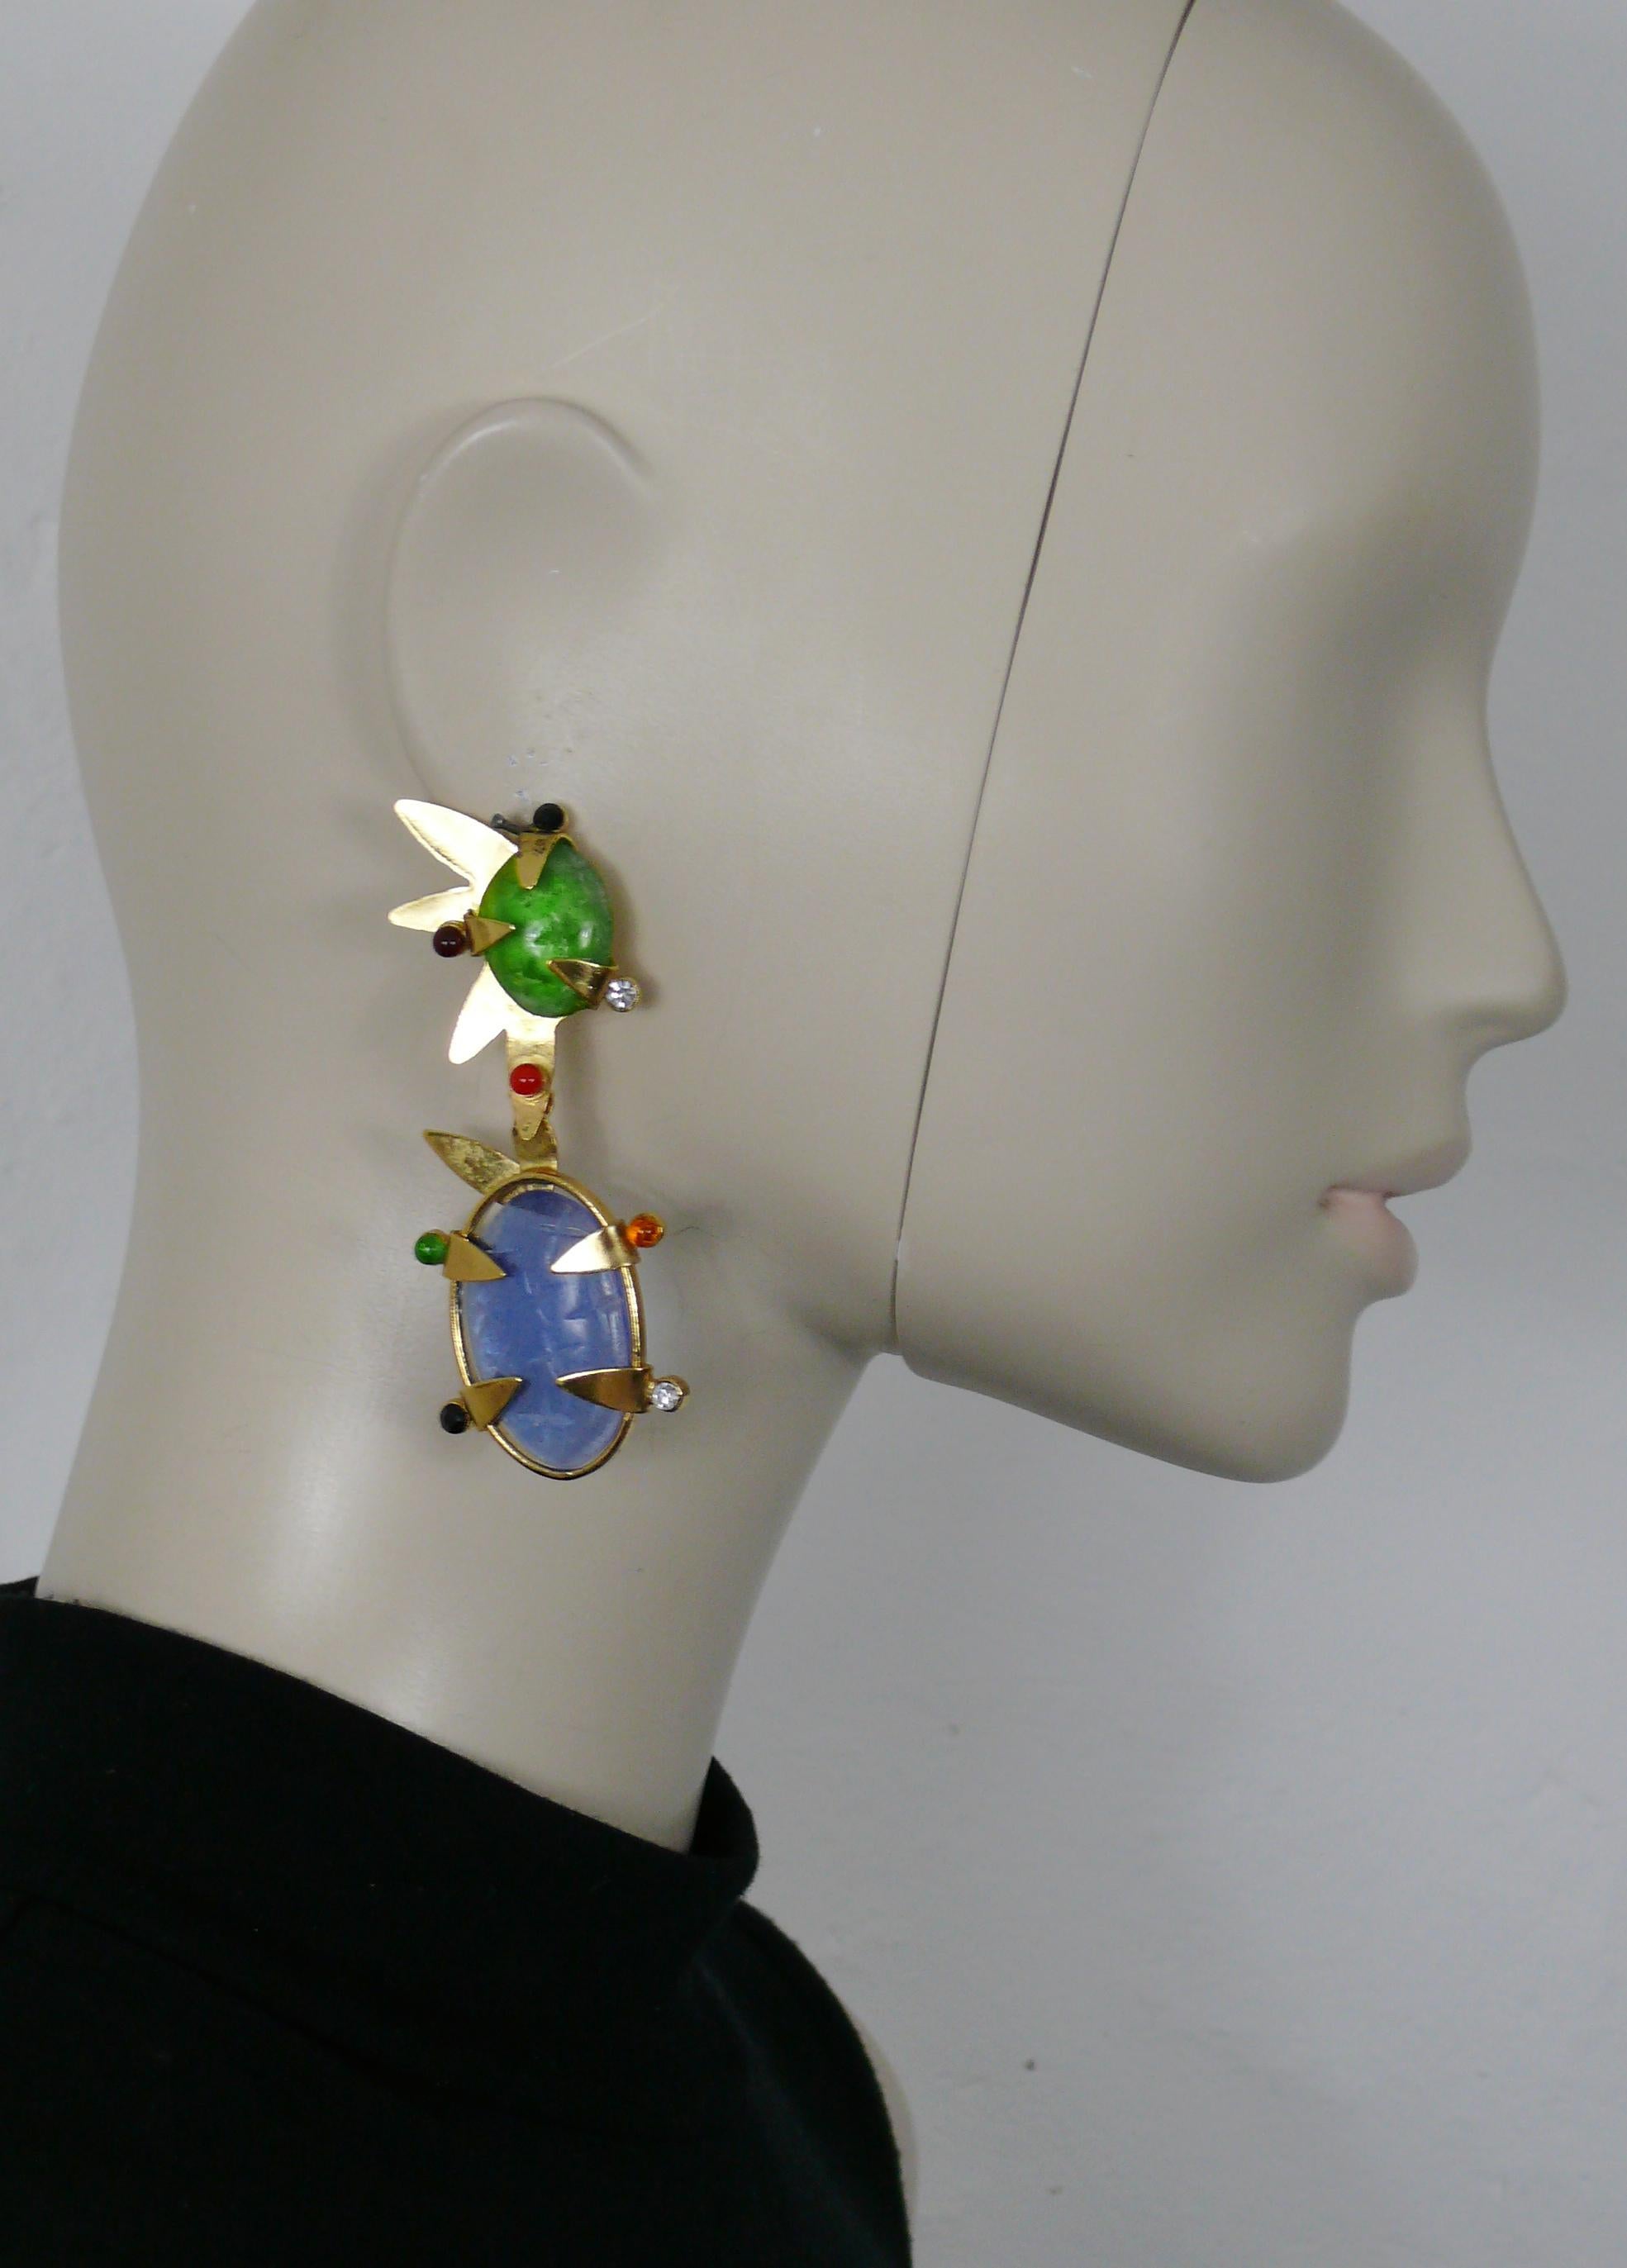 HILTON McCONNICO for DAUM vintage gold toned detachable dangling earrings (clip-on) featuring a spyke/burst design, green and blue pate de verre cabochons with carved X details, multicolor glass cabochons and crystals.

These dangling earrings are